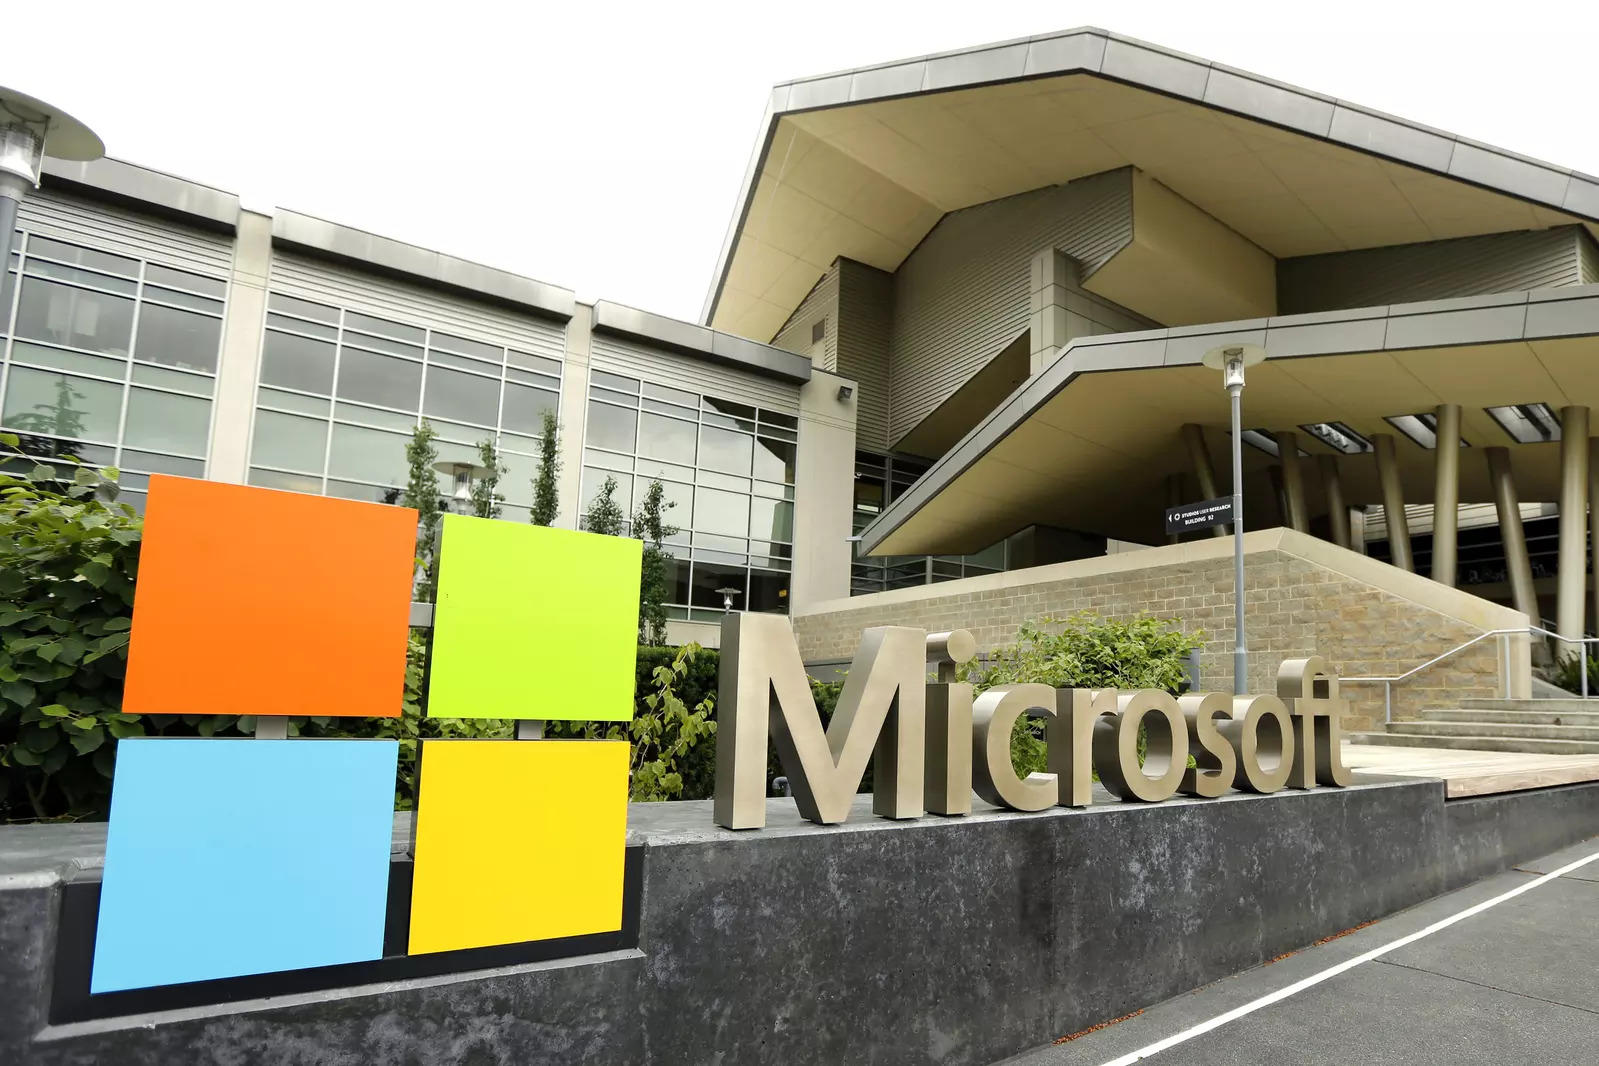 Microsoft helps 30 lakh people in India acquire digital skills